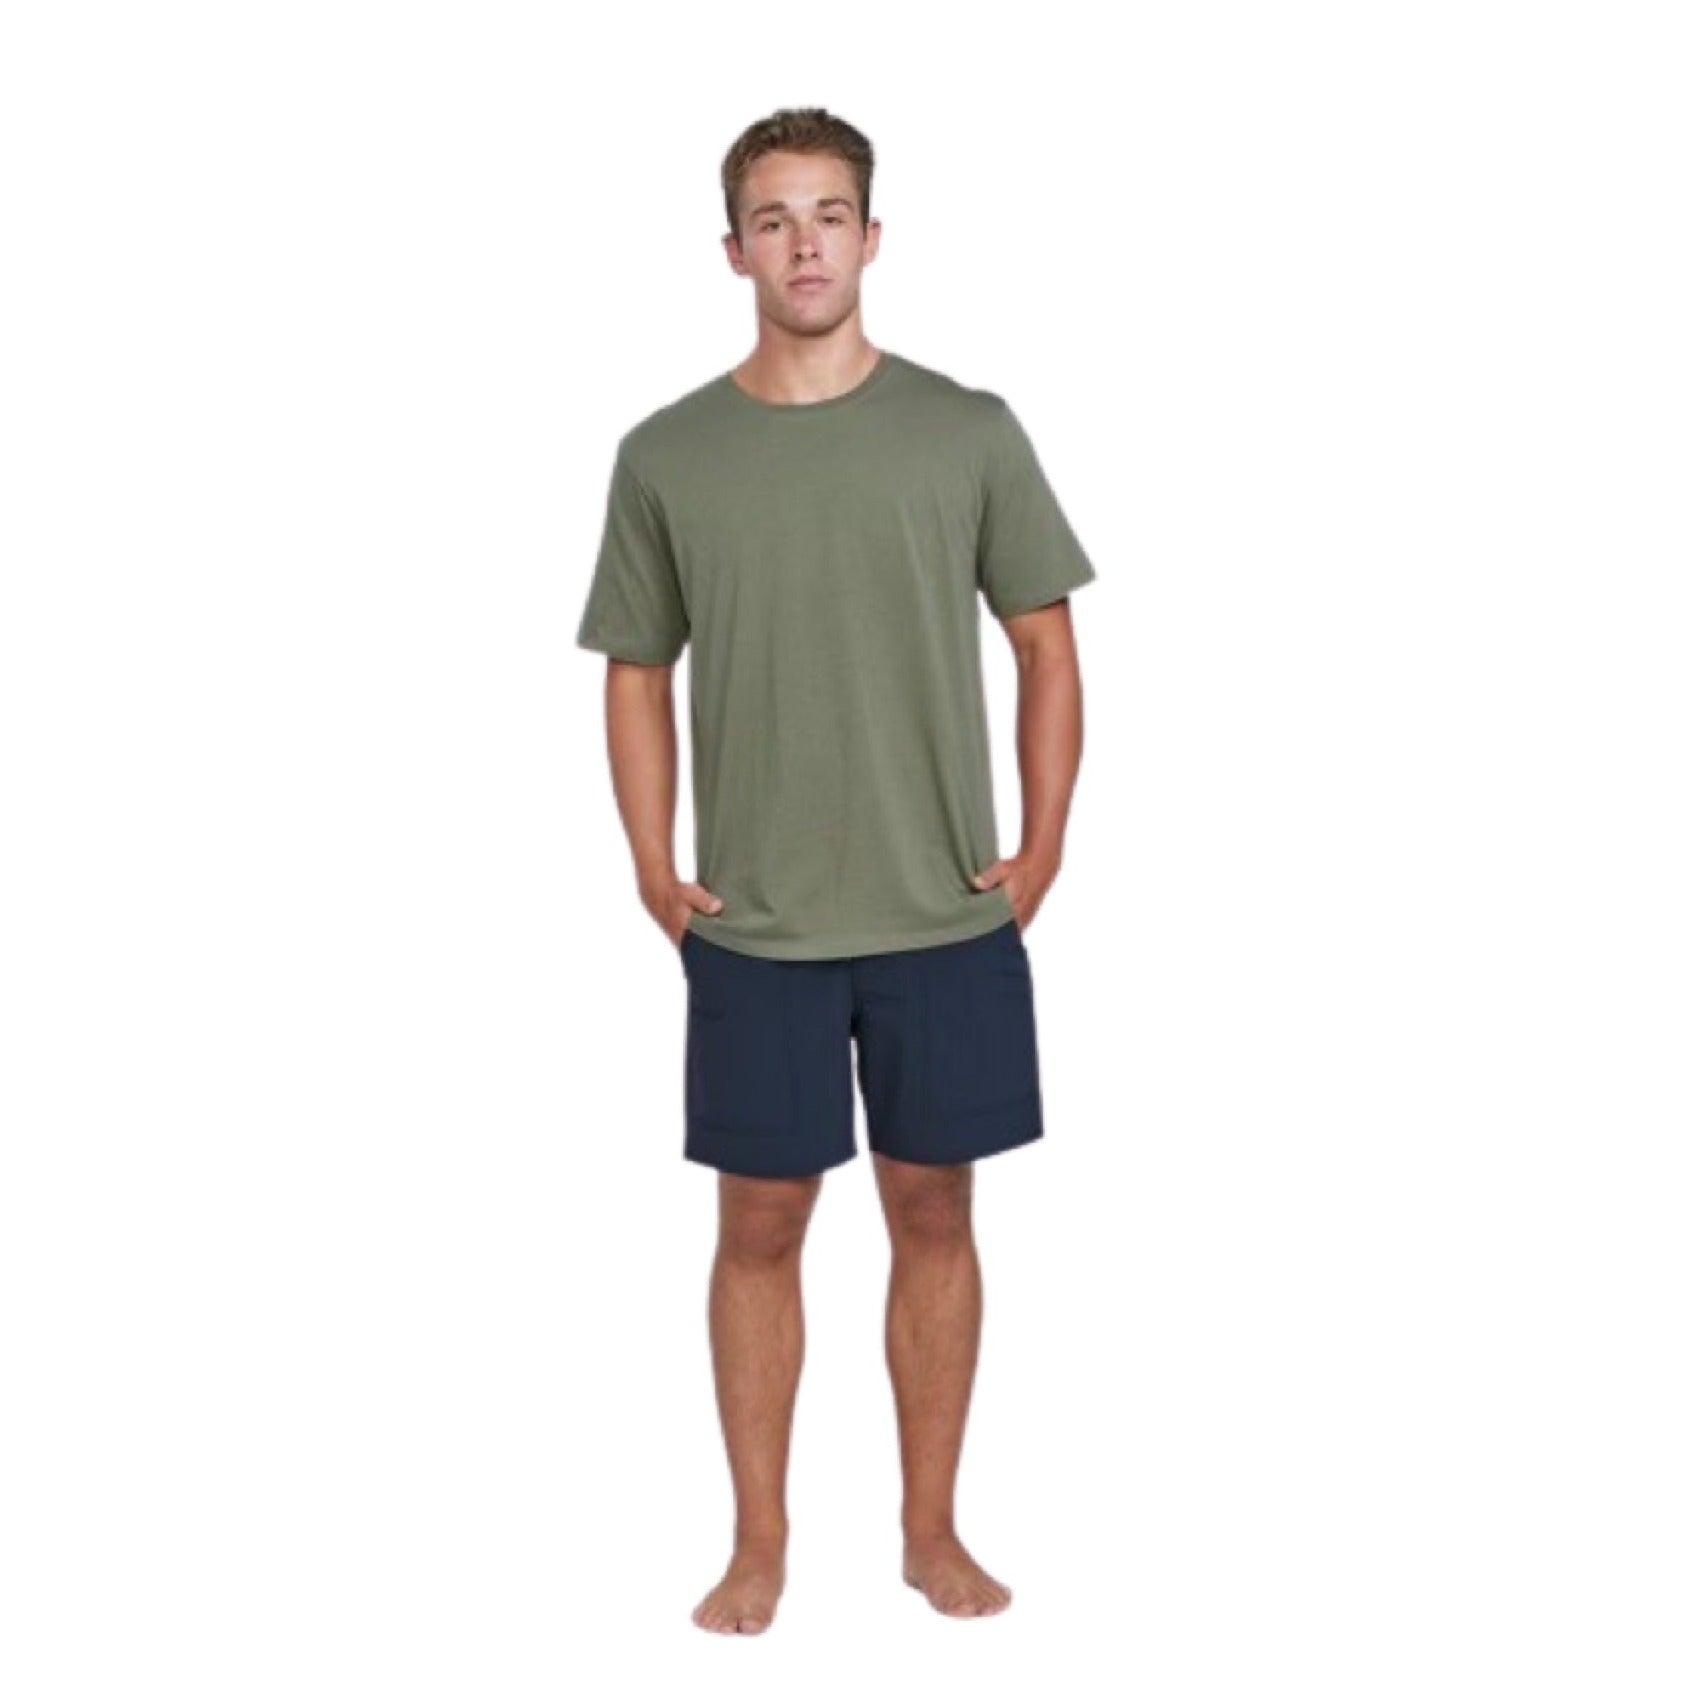 The front view of an olive-colored, short-sleeved shirt.